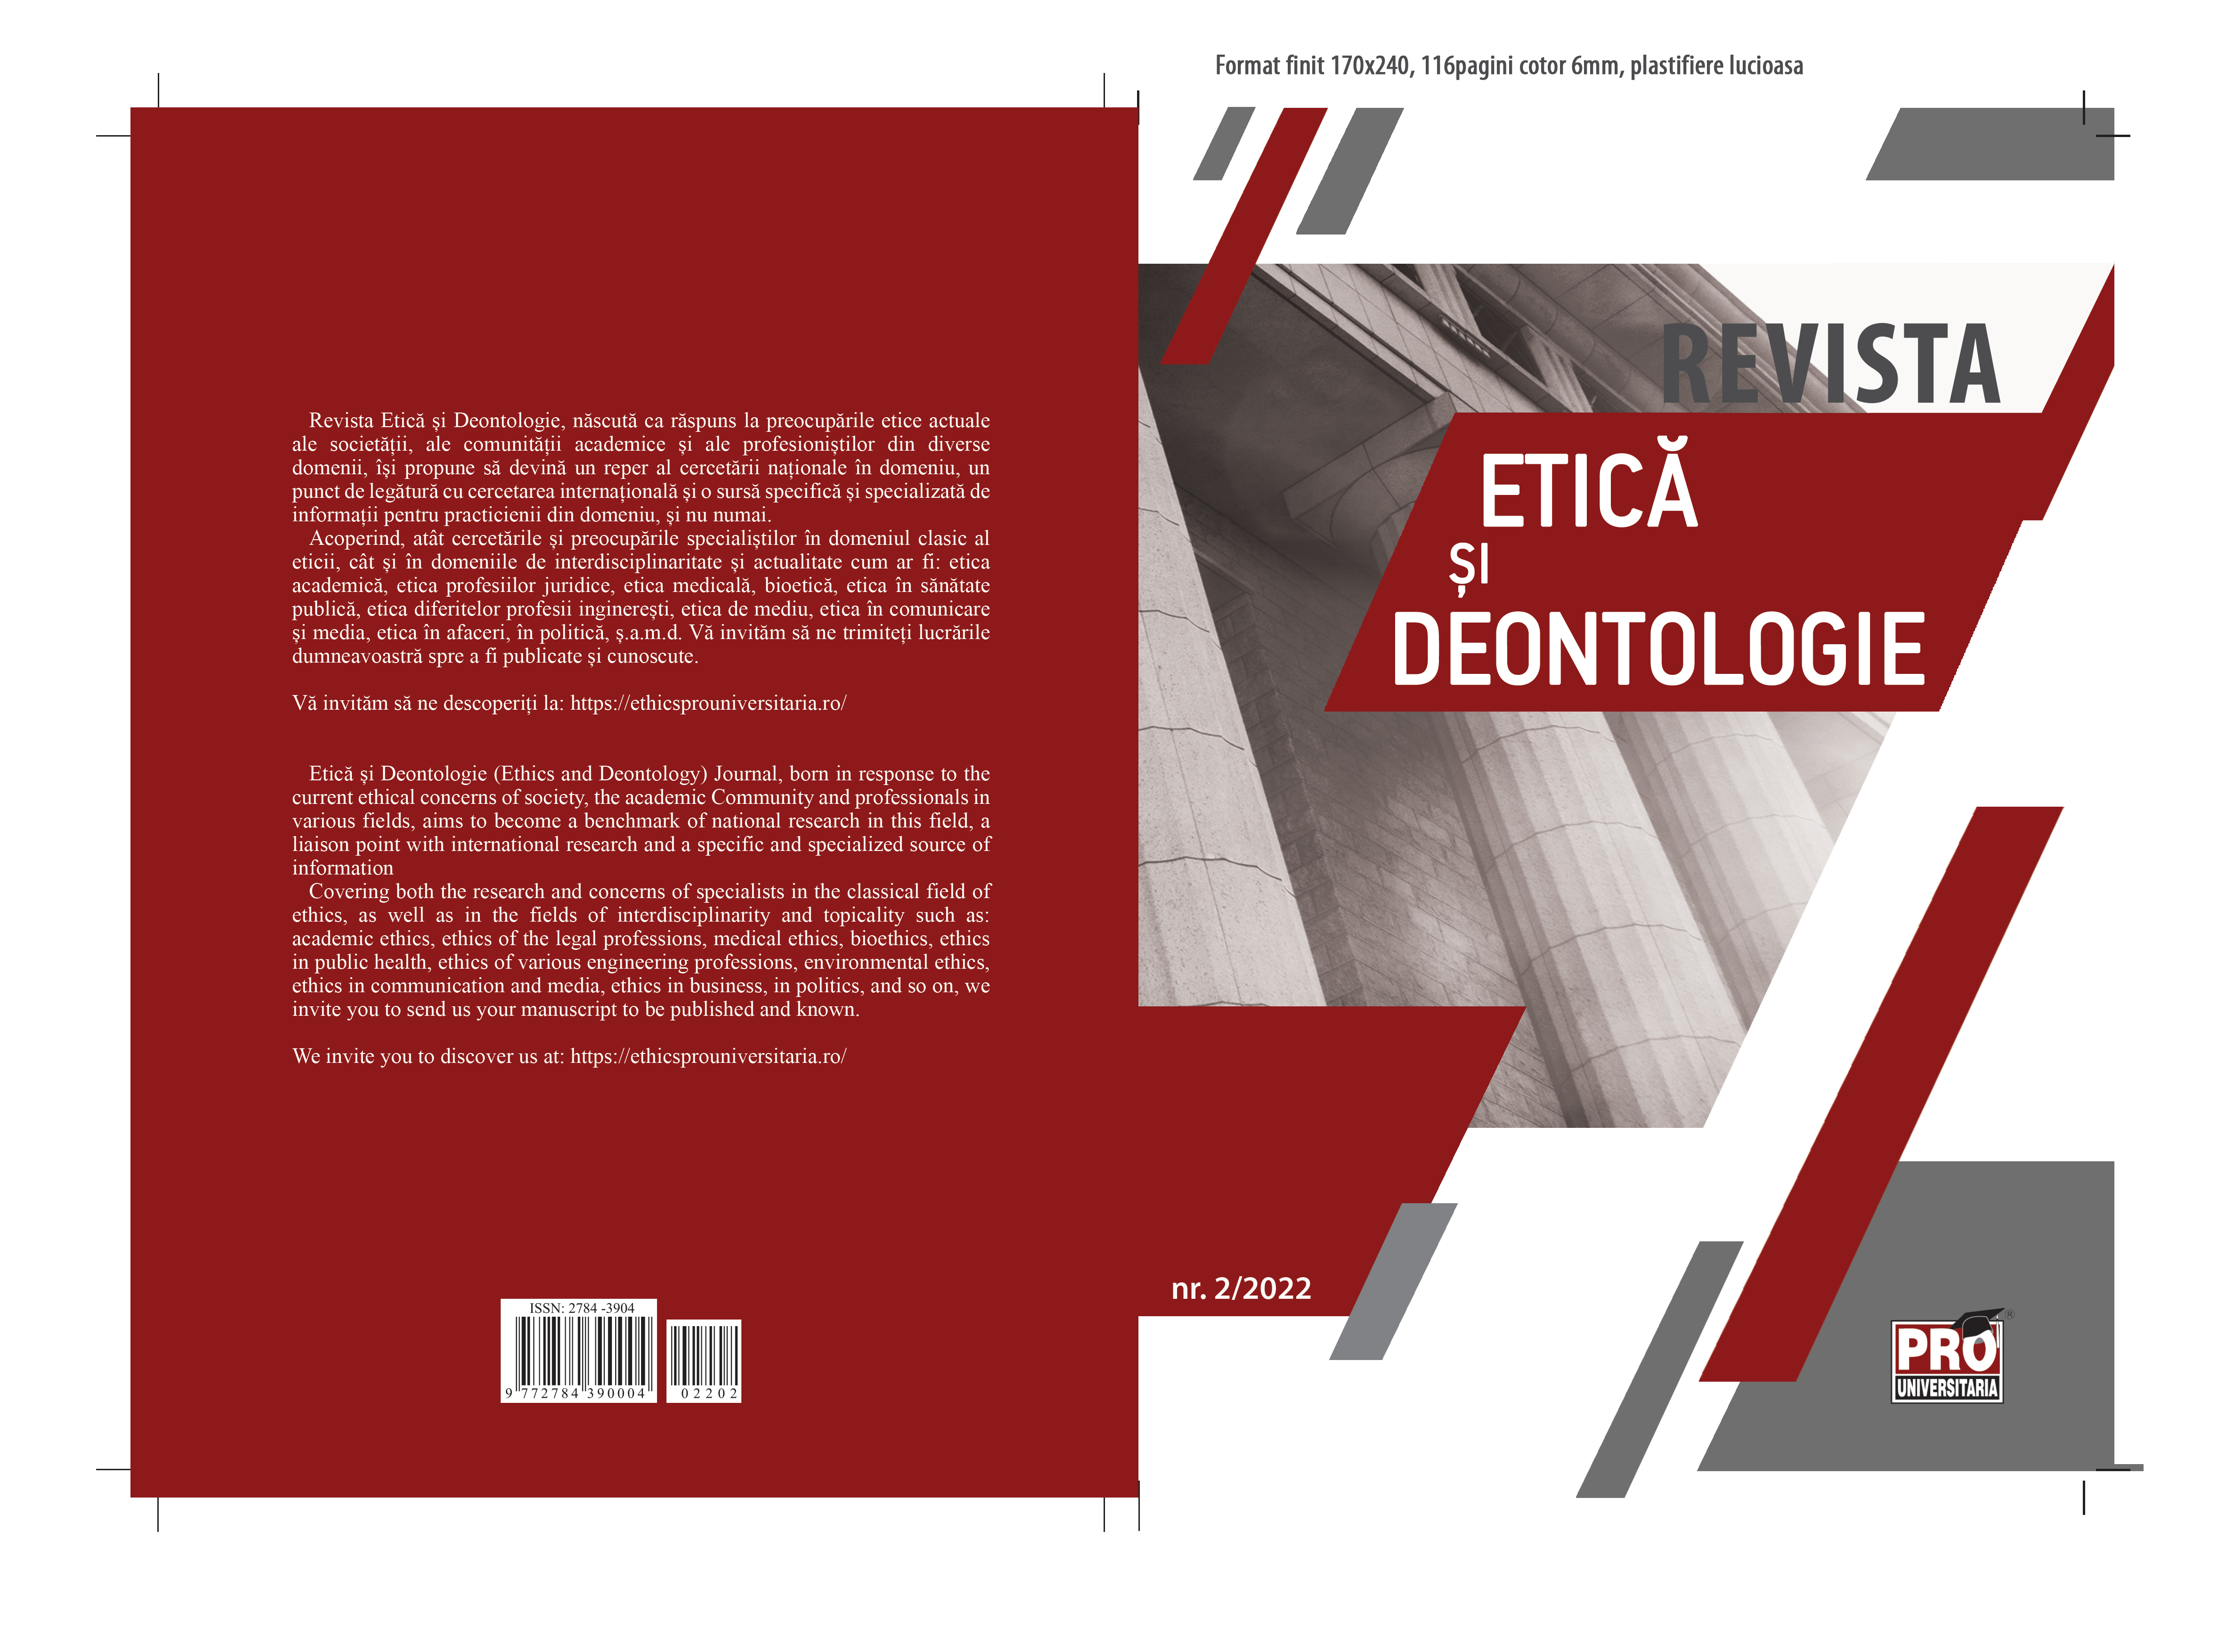 Promoting ethical culture in universities for the development of ethical behavior Cover Image